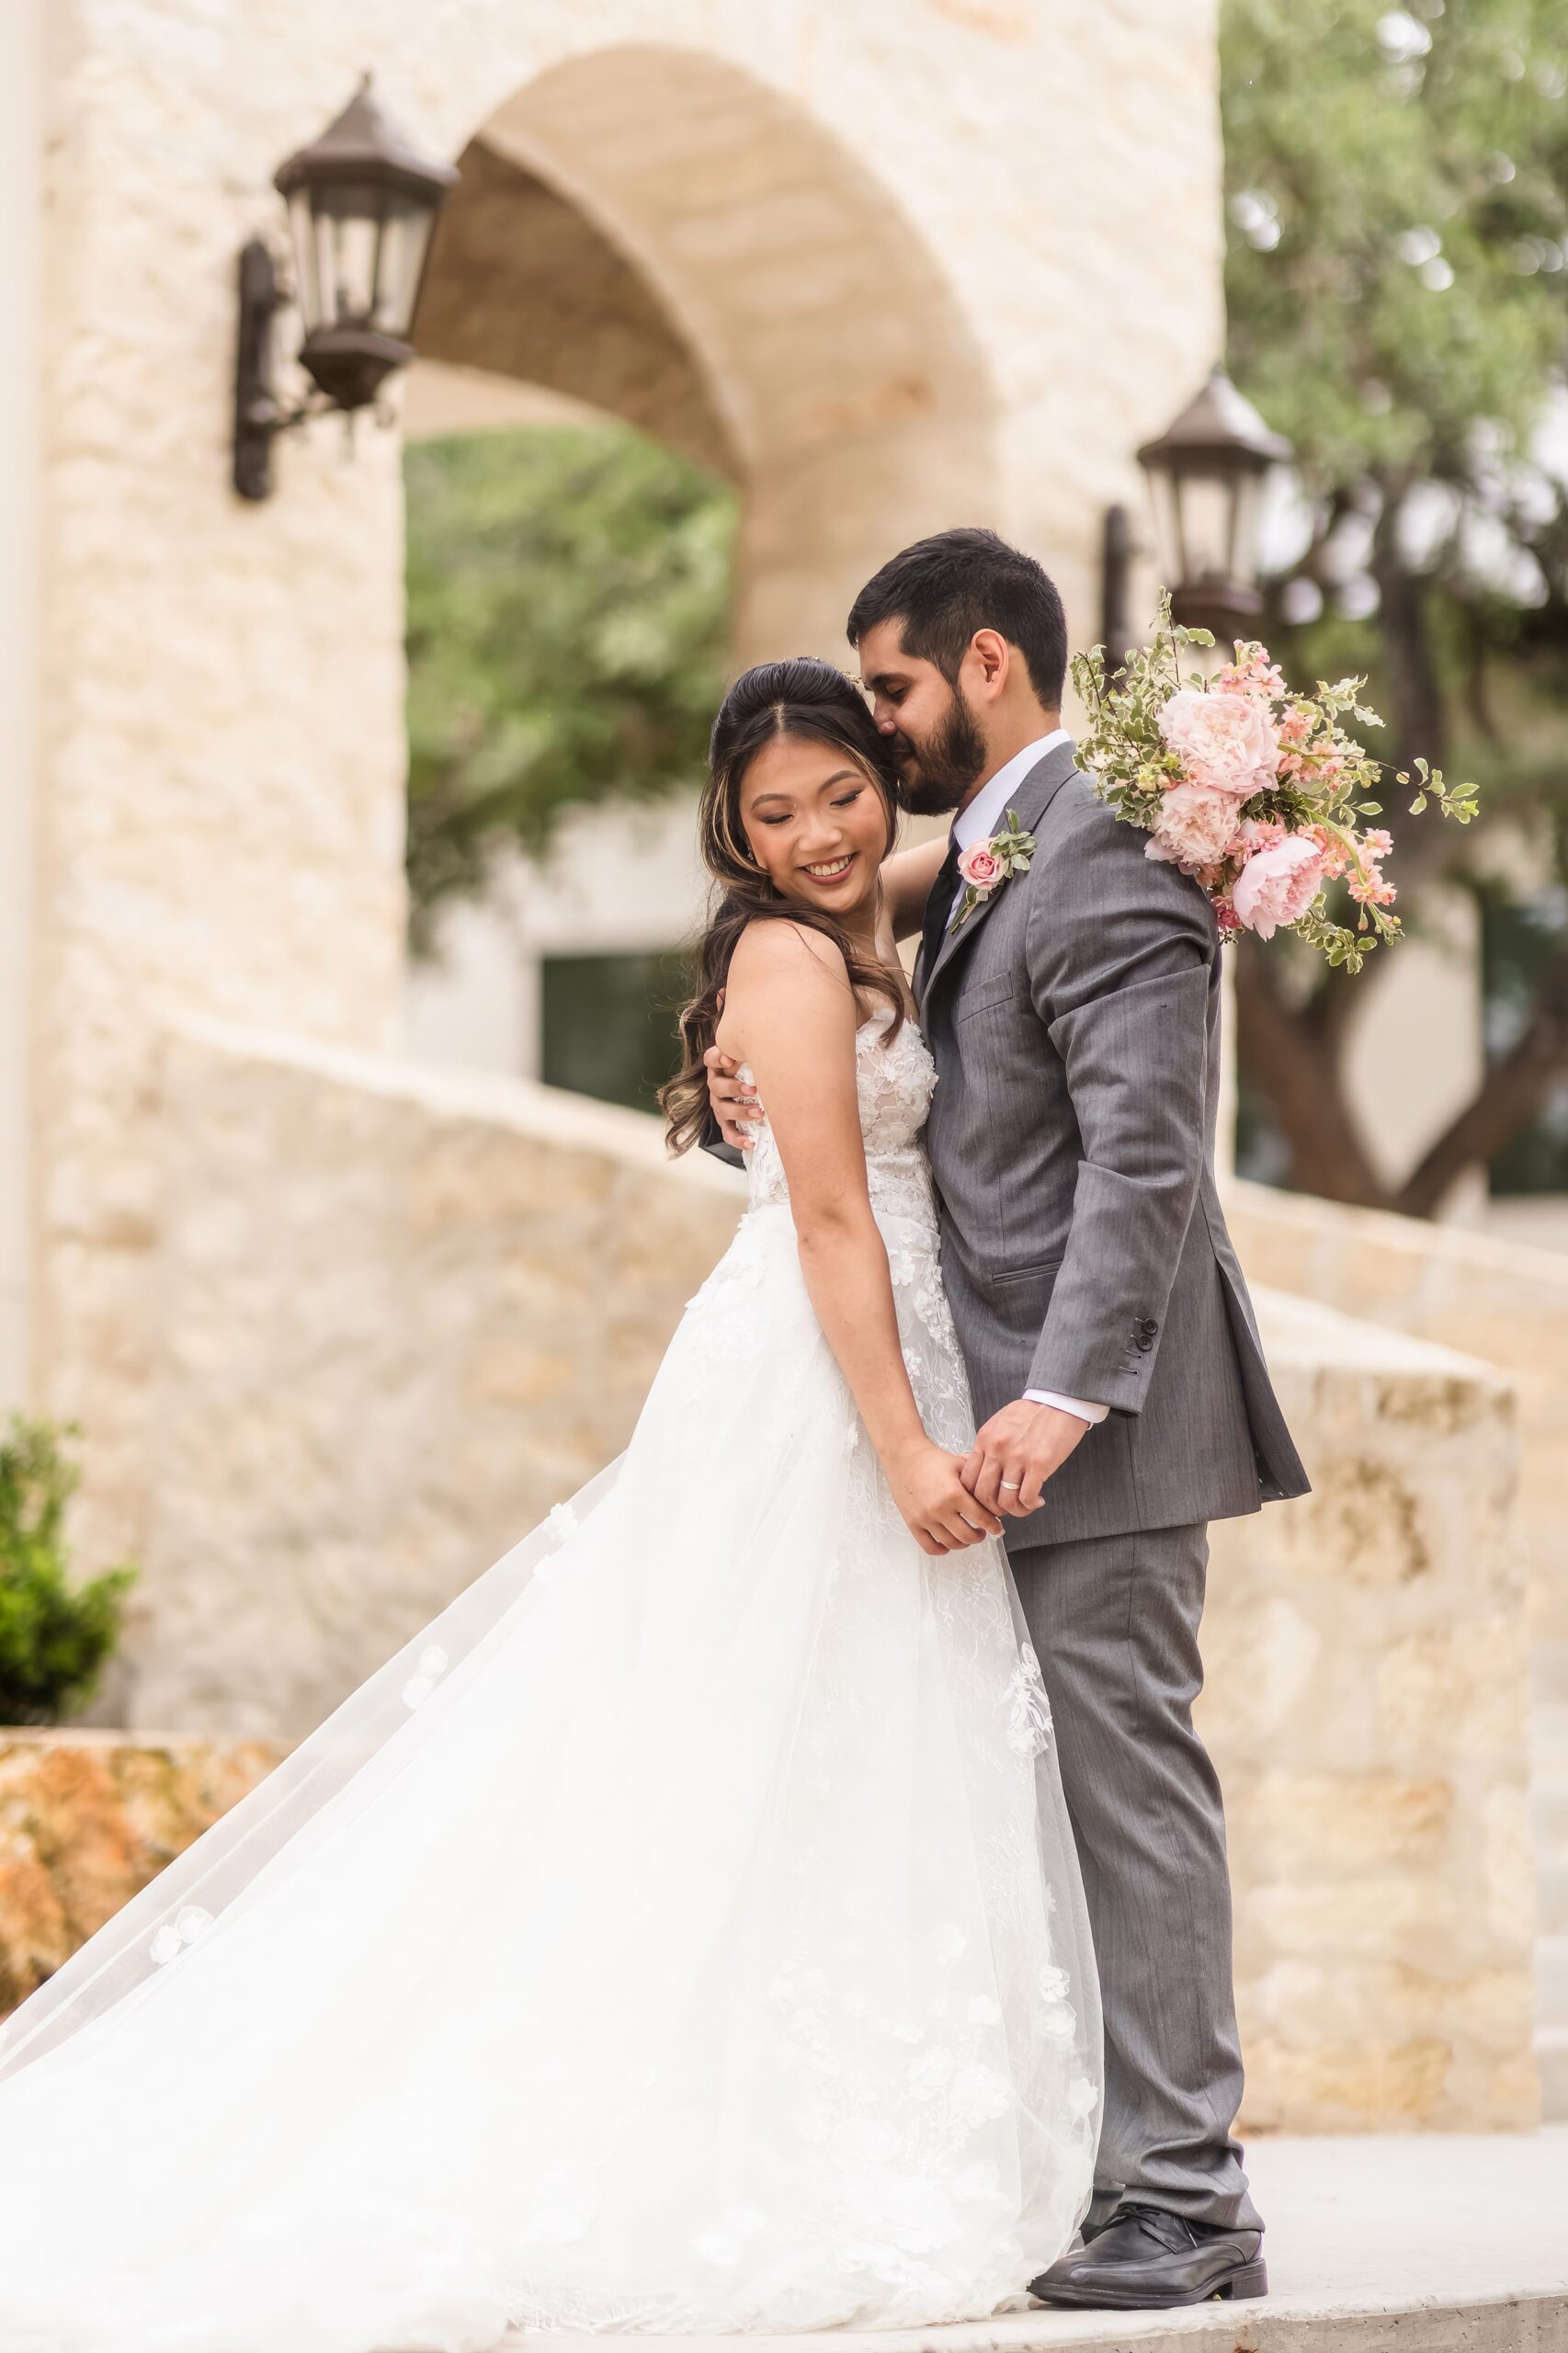 Bride & Groom celebrate their wedding at the Preserve at Canyon Lake Venue in Texas.